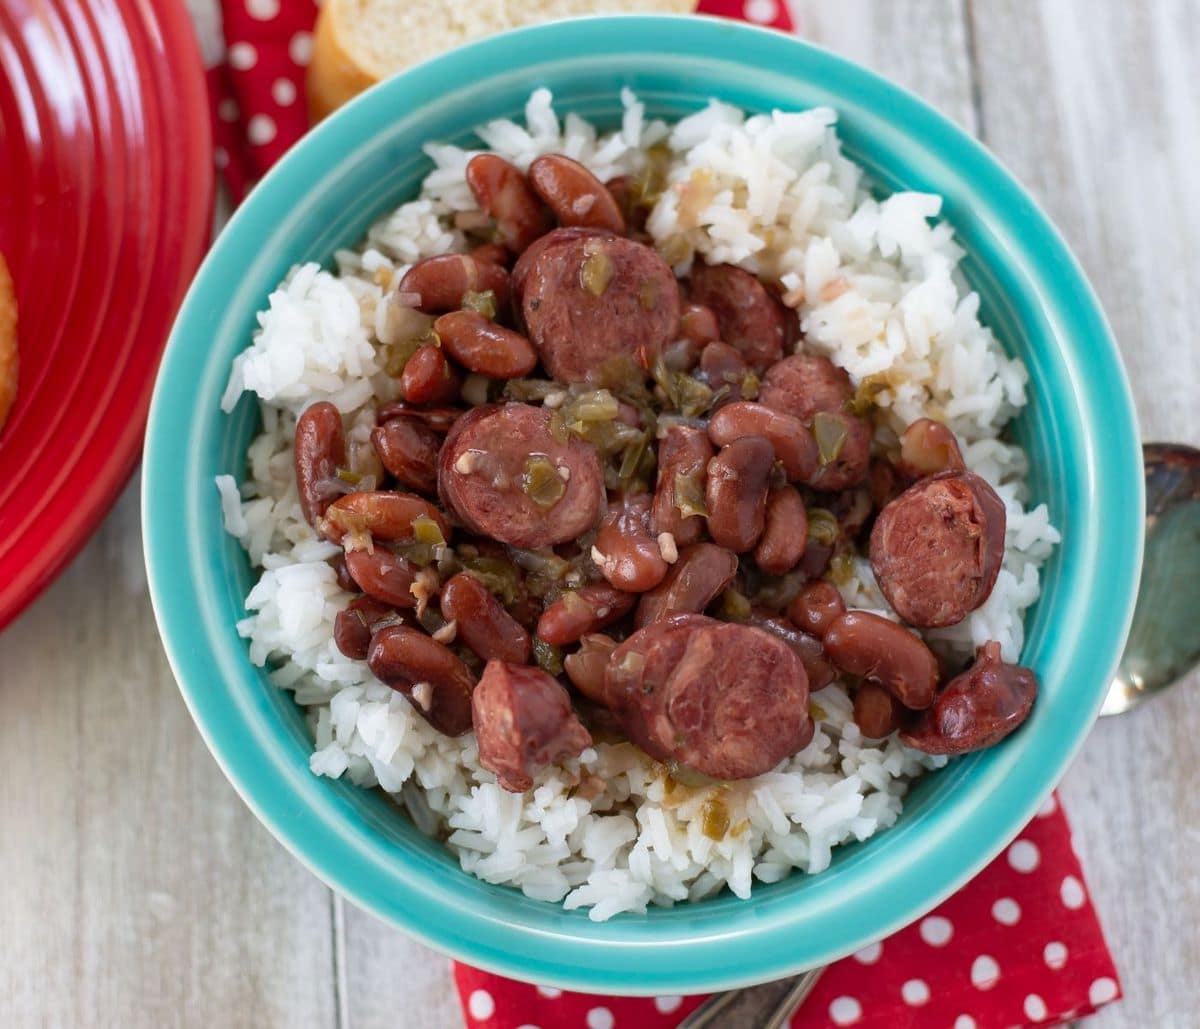 Spicy Cajun Red Beans and Rice served in a teal Fiesta ware bowl.